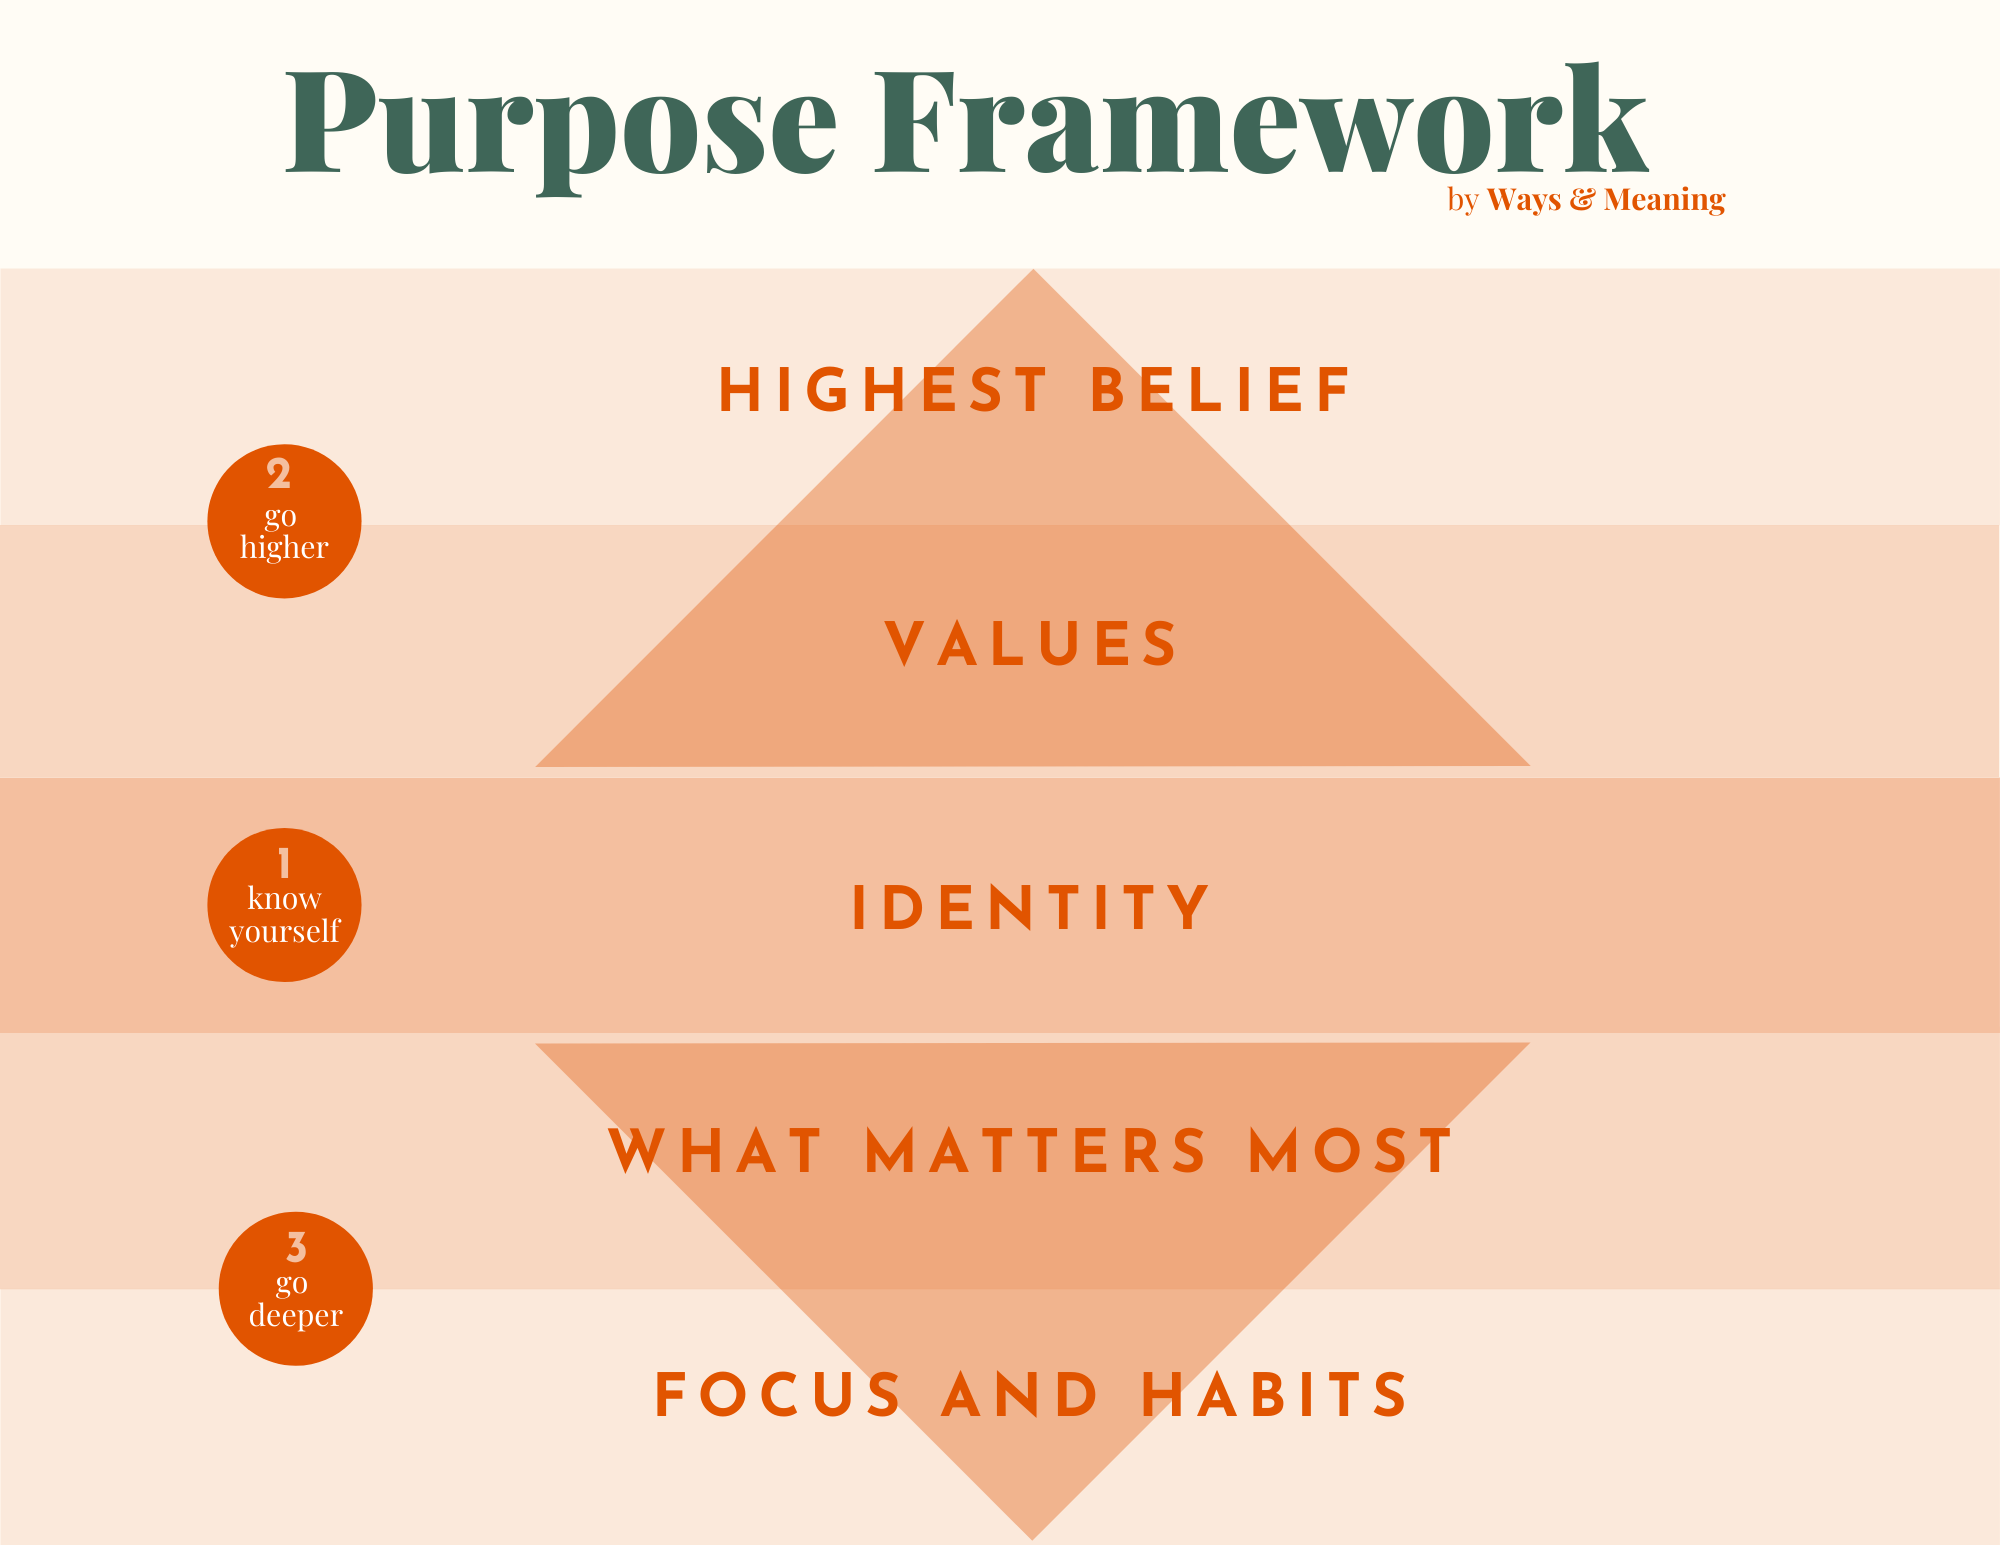 The Purpose Framework, by Ways & Meaning